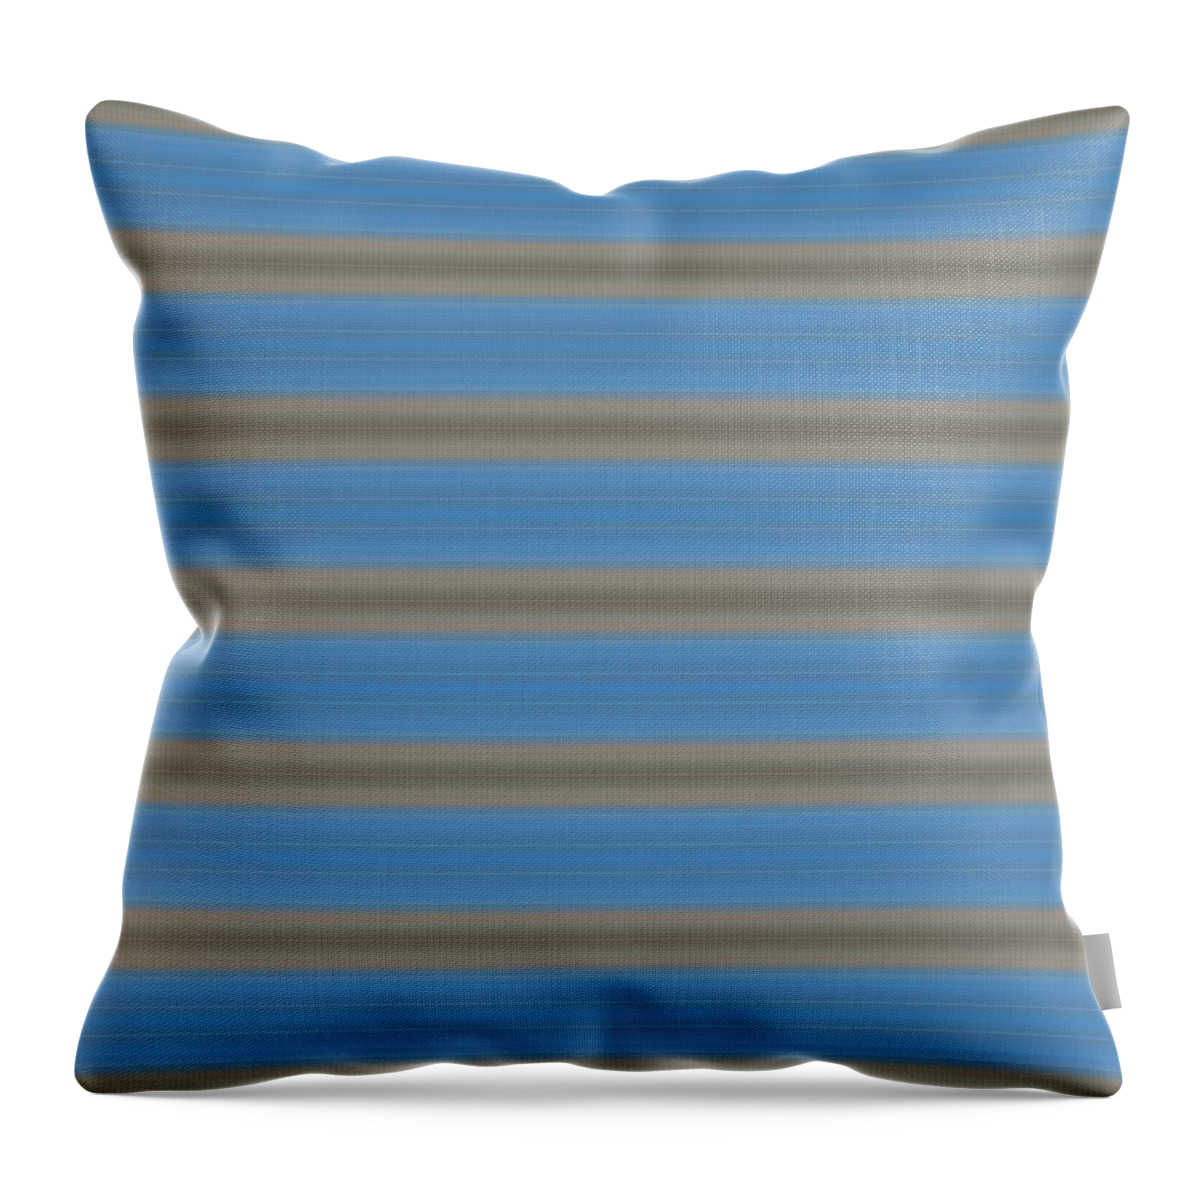 Blue Throw Pillow featuring the digital art T J O D X X X Compilation 88 to 1 by Helena Tiainen